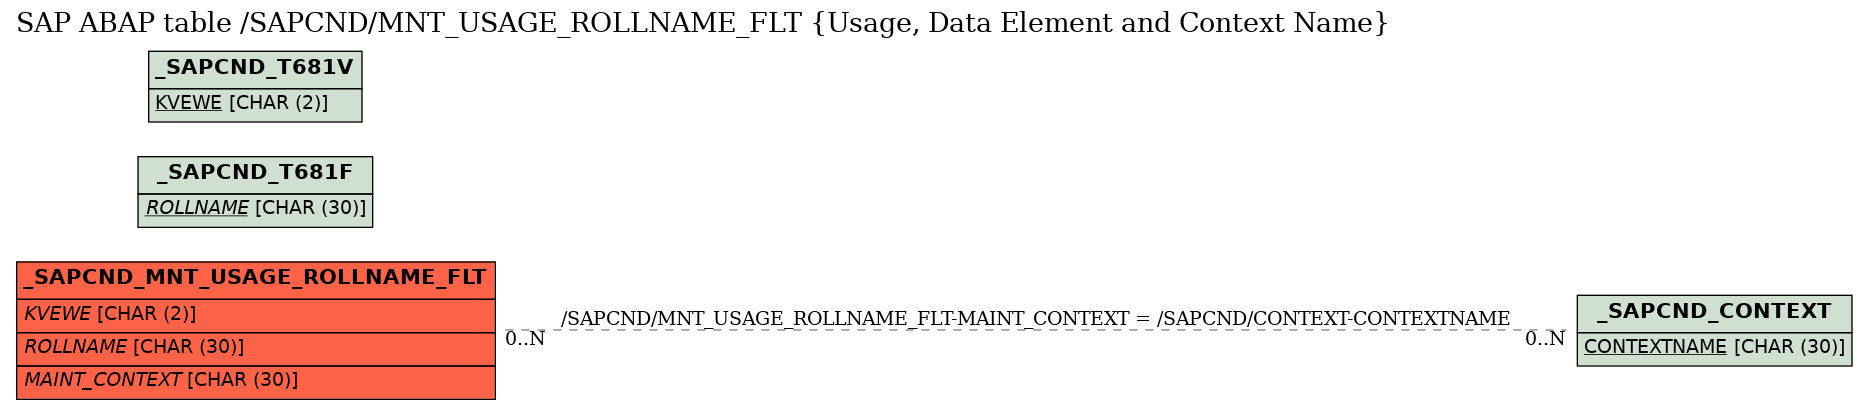 E-R Diagram for table /SAPCND/MNT_USAGE_ROLLNAME_FLT (Usage, Data Element and Context Name)